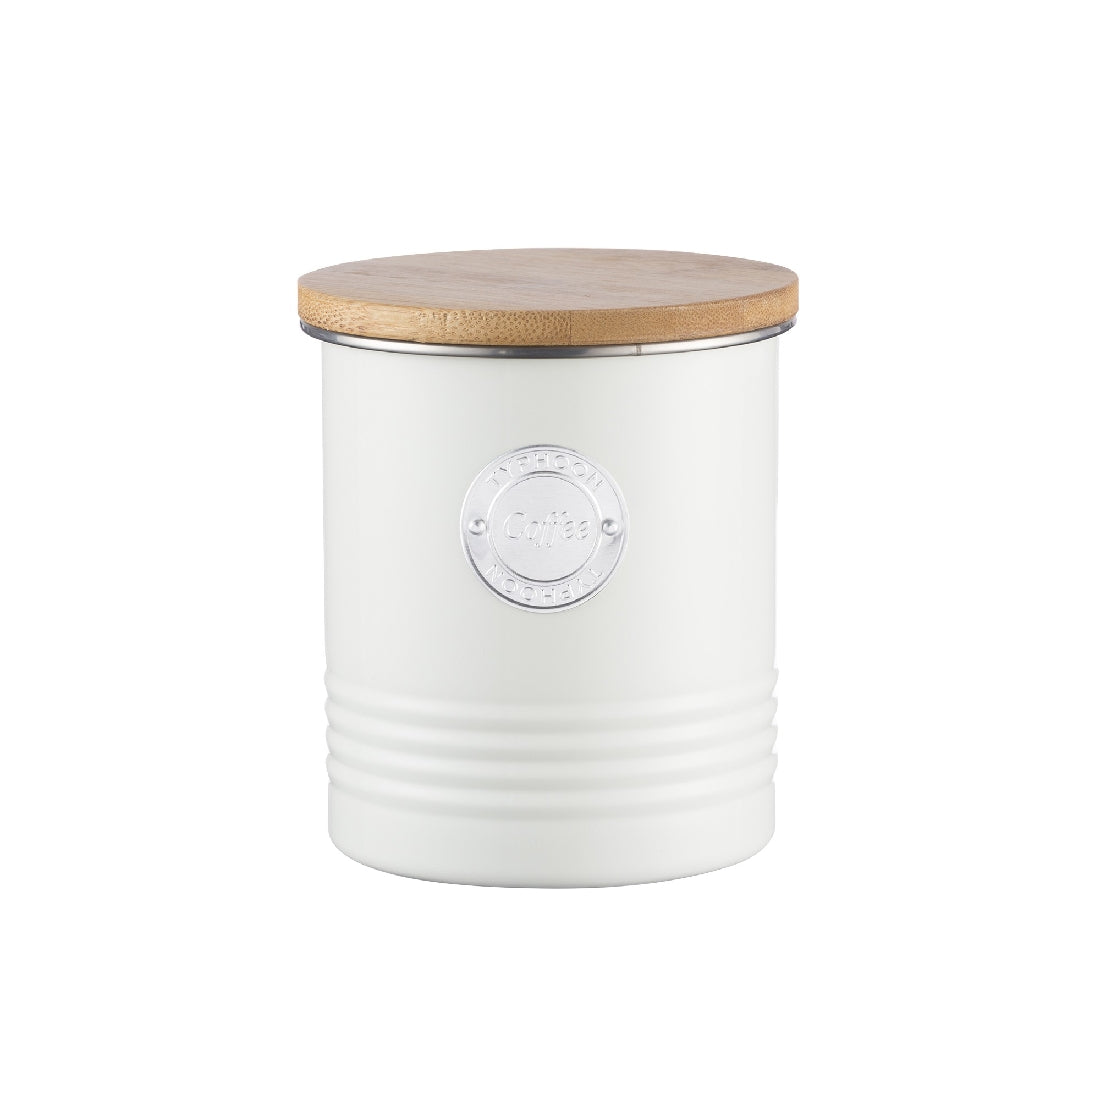 Typhoon Living Coffee Canister 1l - Cream